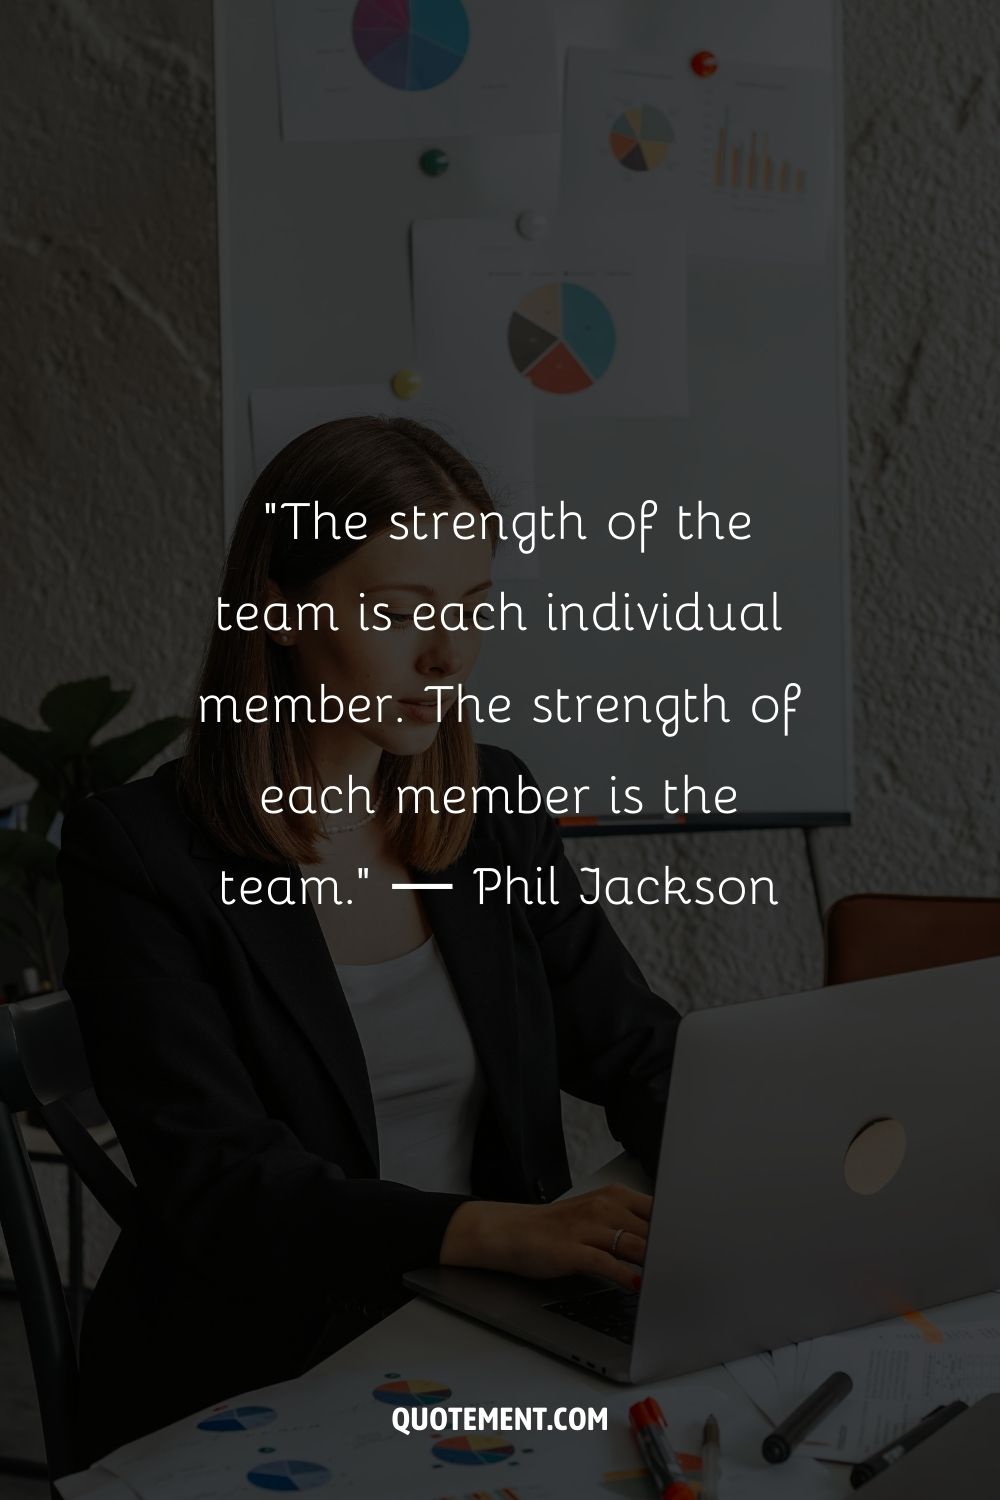 “The strength of the team is each individual member. The strength of each member is the team.” ― Phil Jackson